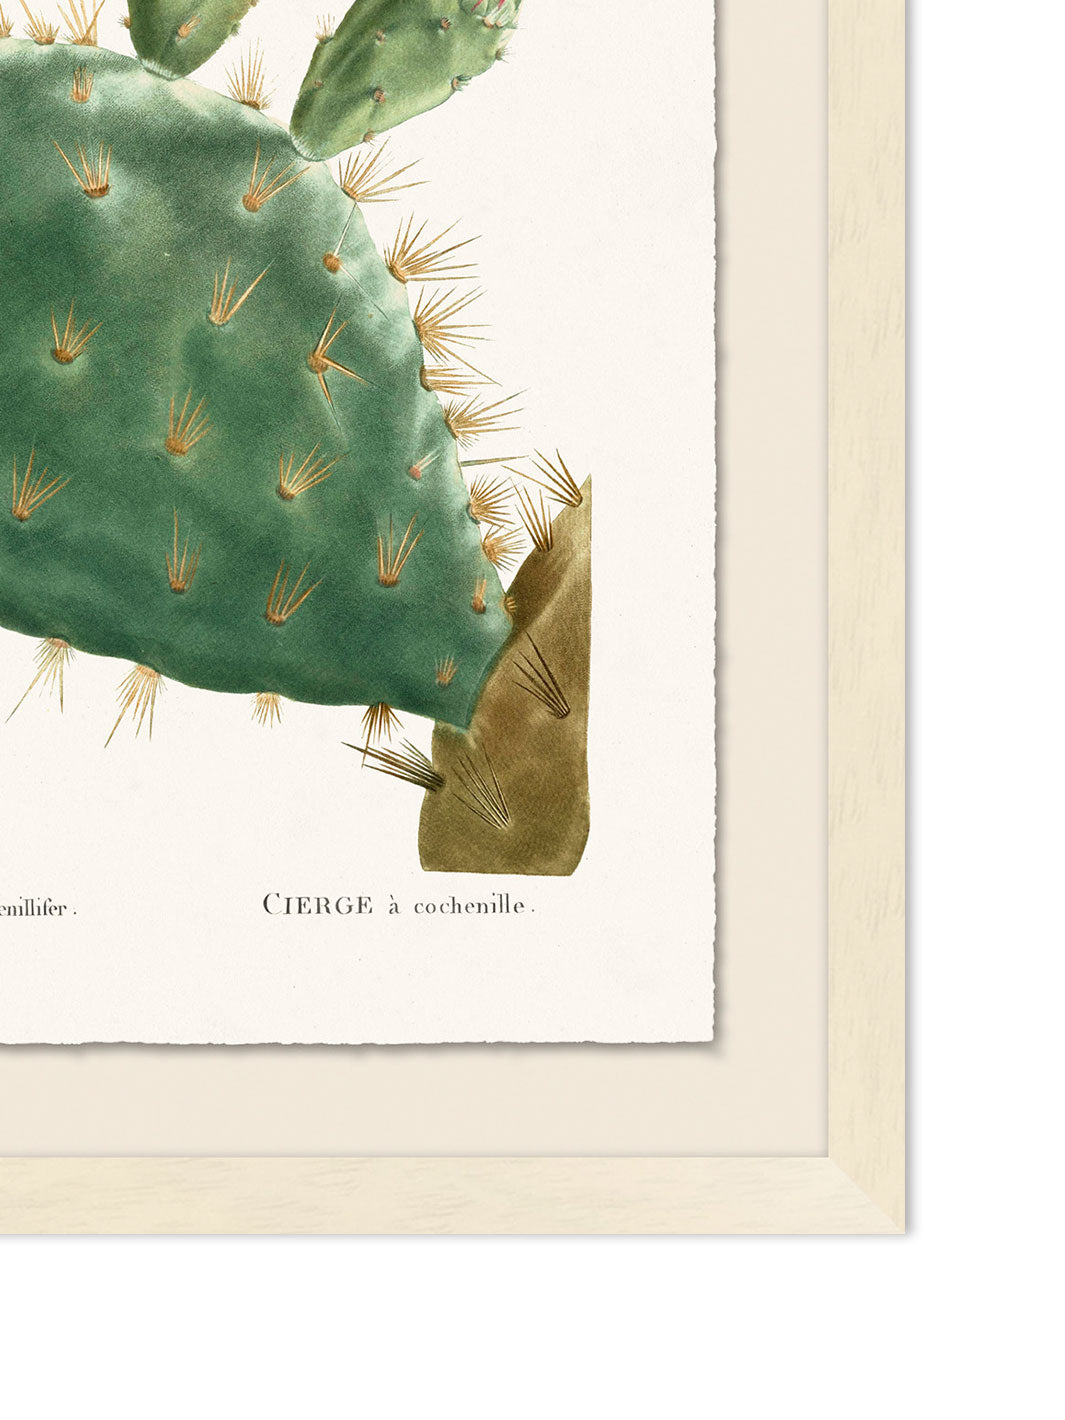 'Blooming Cacti 4' by Nathan Turner Framed Art